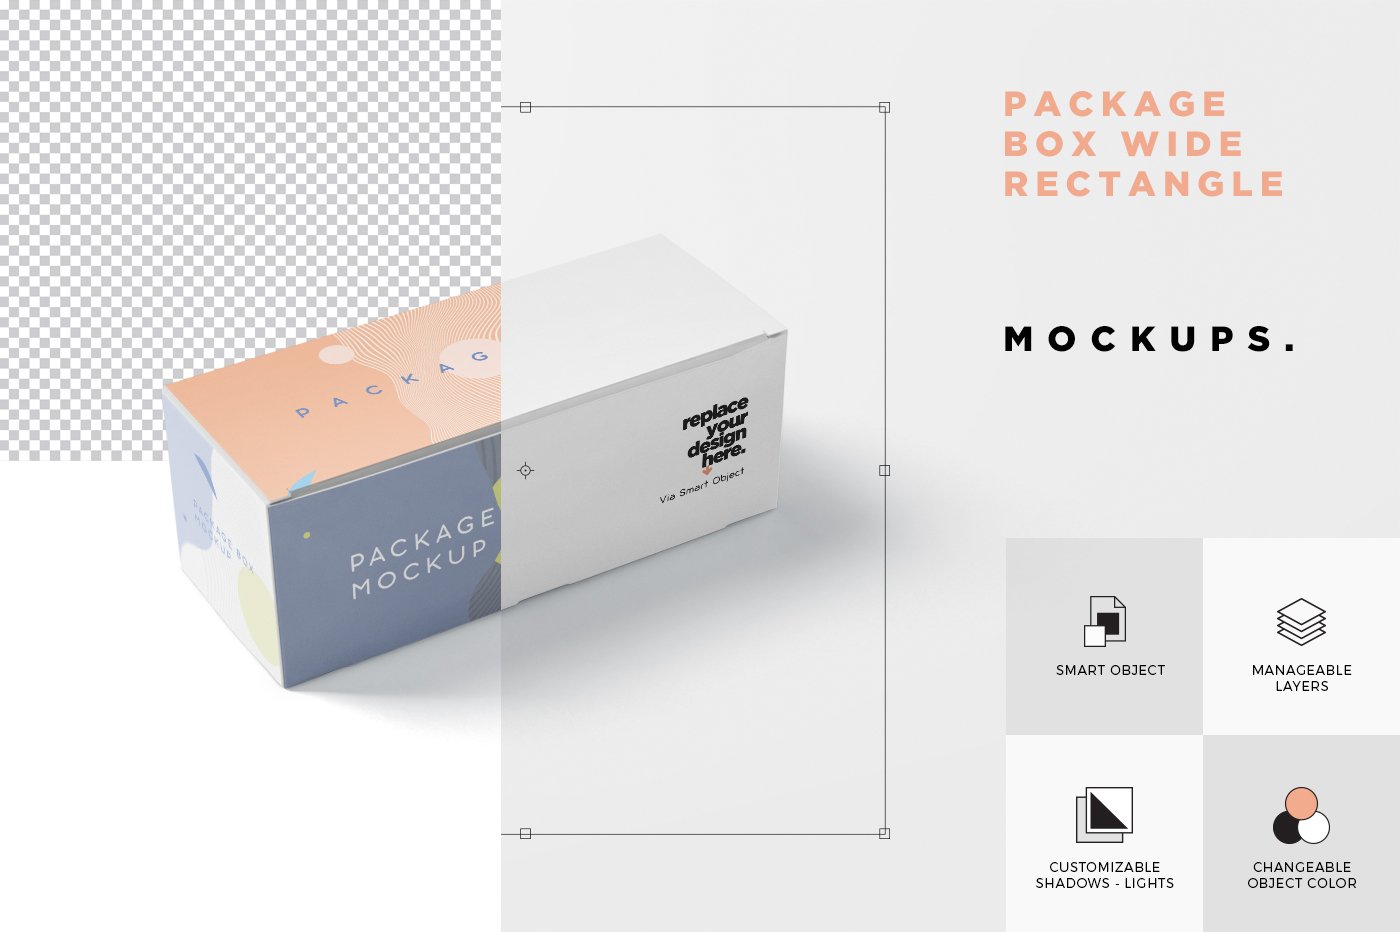 mockup features image 510